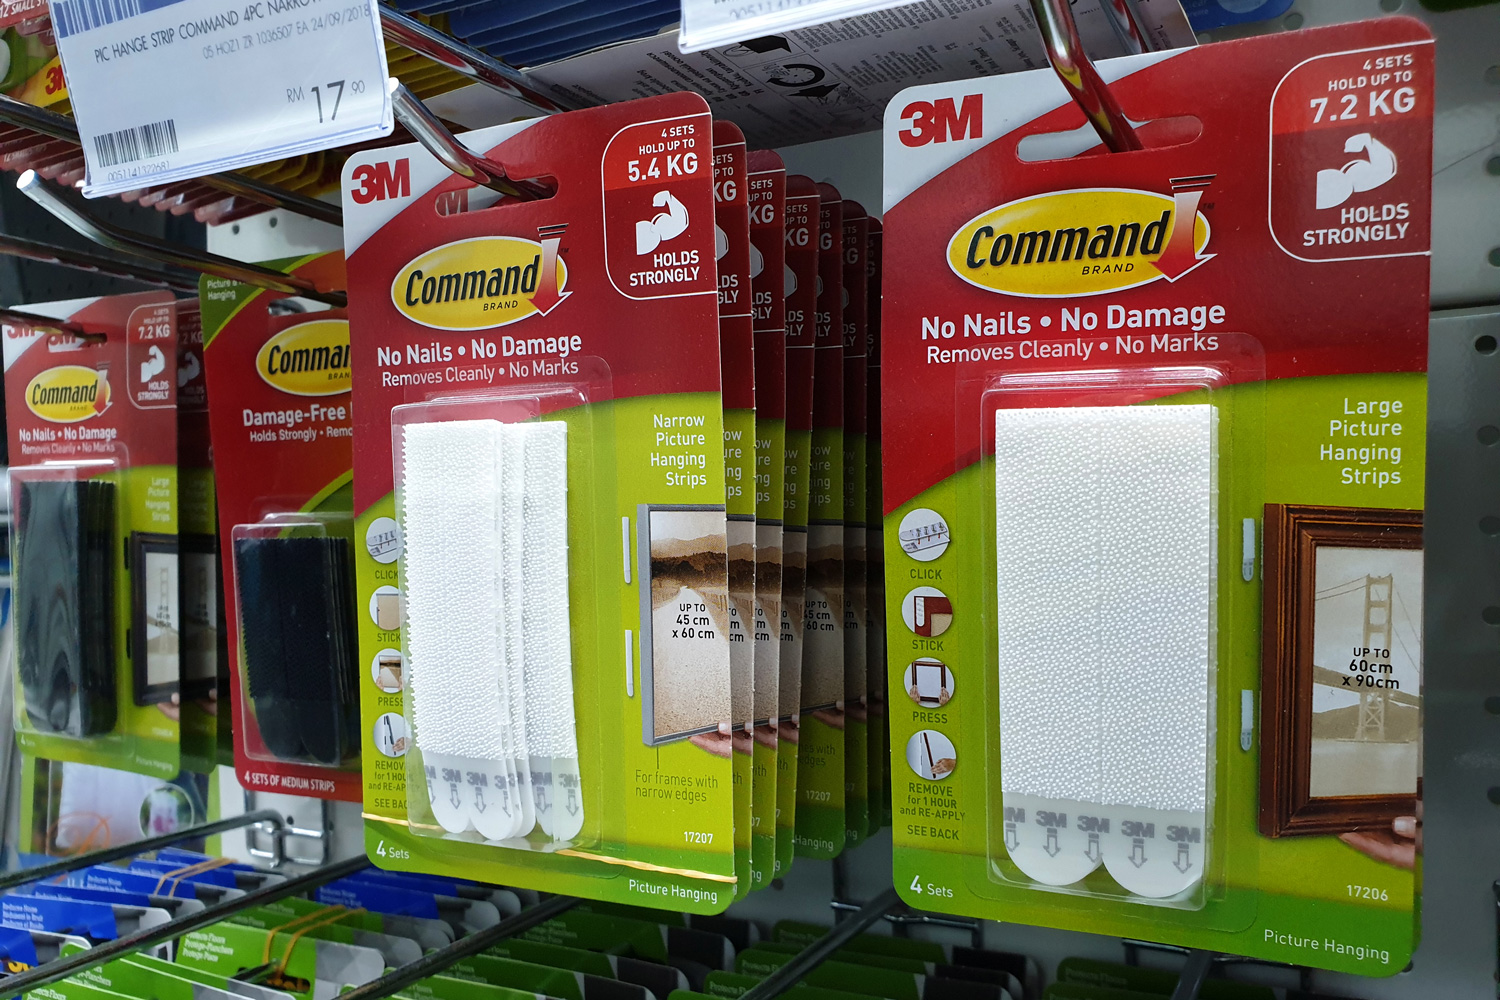  Command brand Picture Hanging Strips and Hooks by 3M company on store shelf. 3M is the general public primarily known for the Post-it Notes and Scotch Tapes.